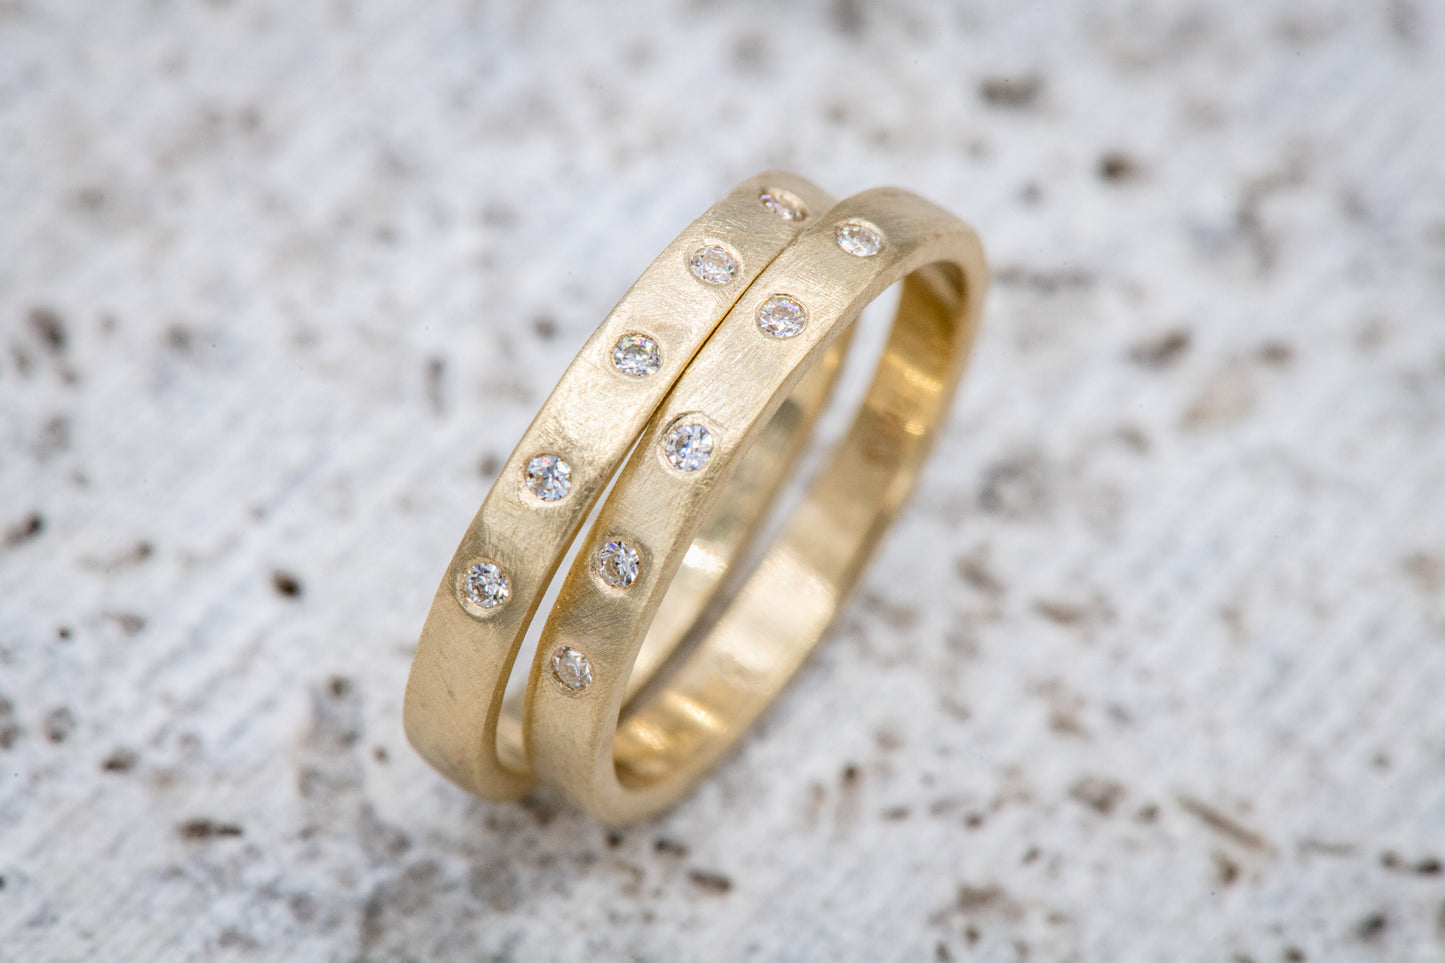 Handmade Moissanite Gold Wedding Bands with diamonds by Cassin Jewelry.